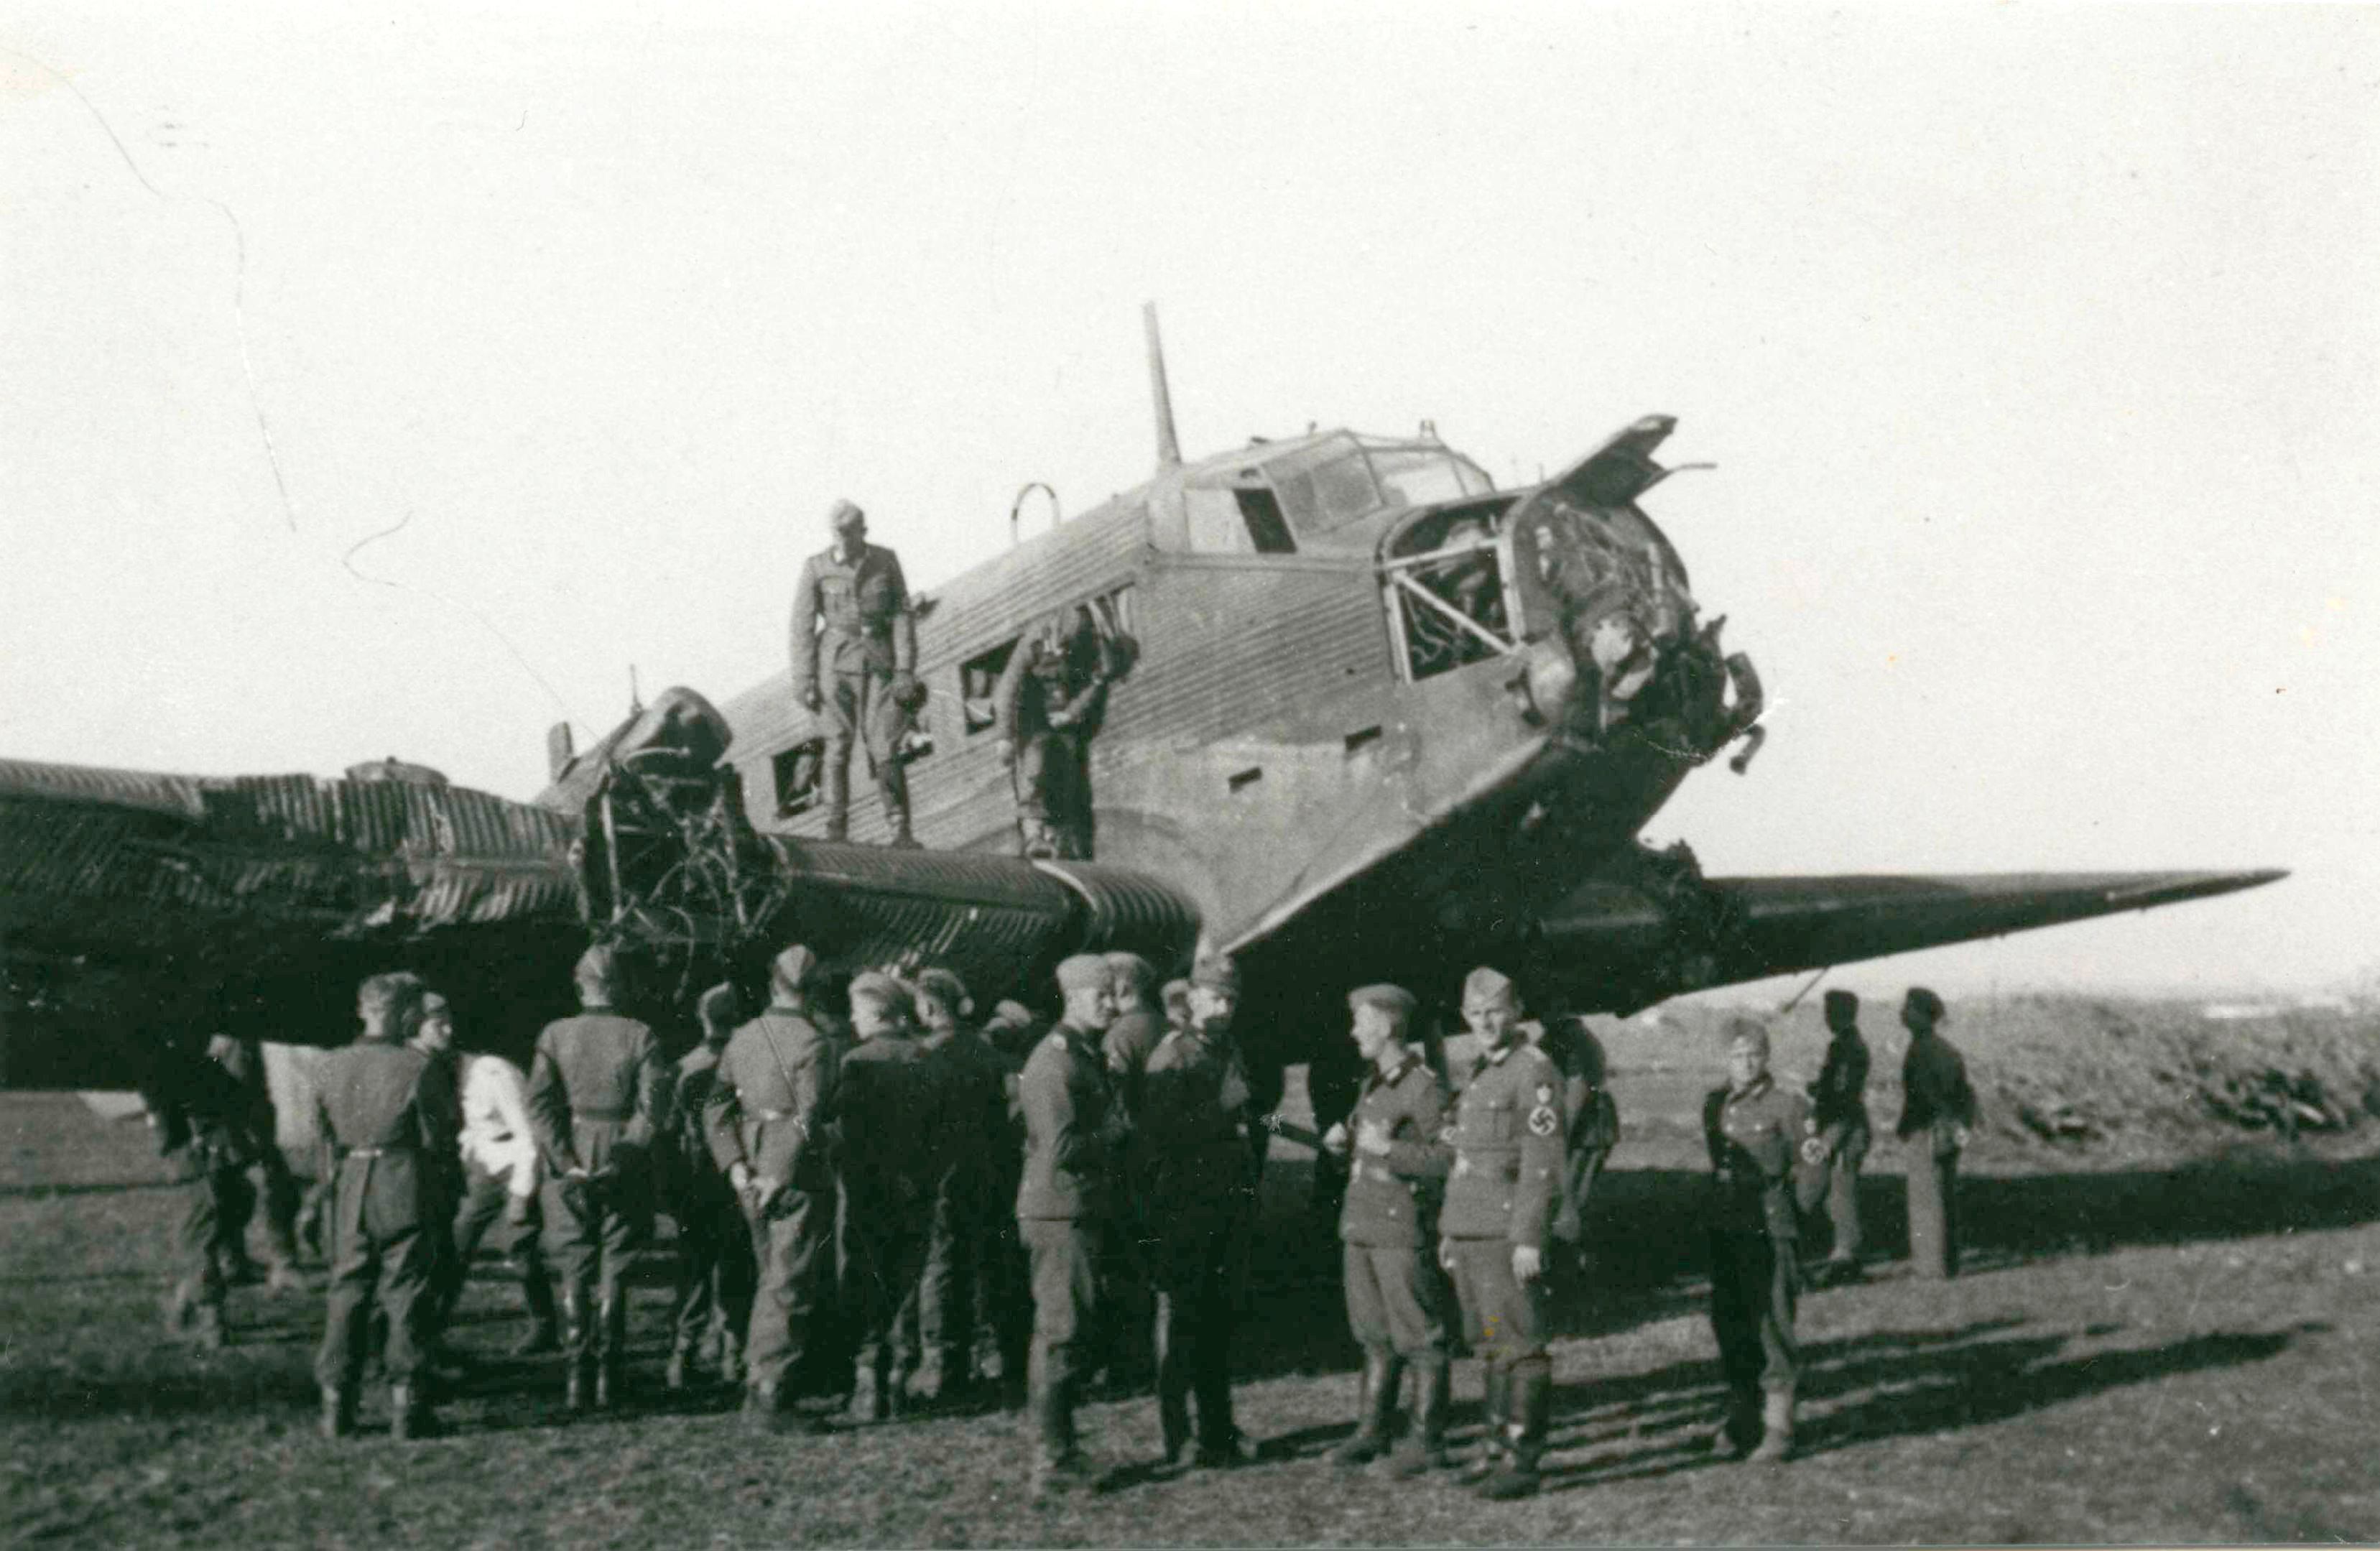 Fall Gelb Junkers Ju 52 3m shot down over Netherlands being salvaged May 1940 NIOD